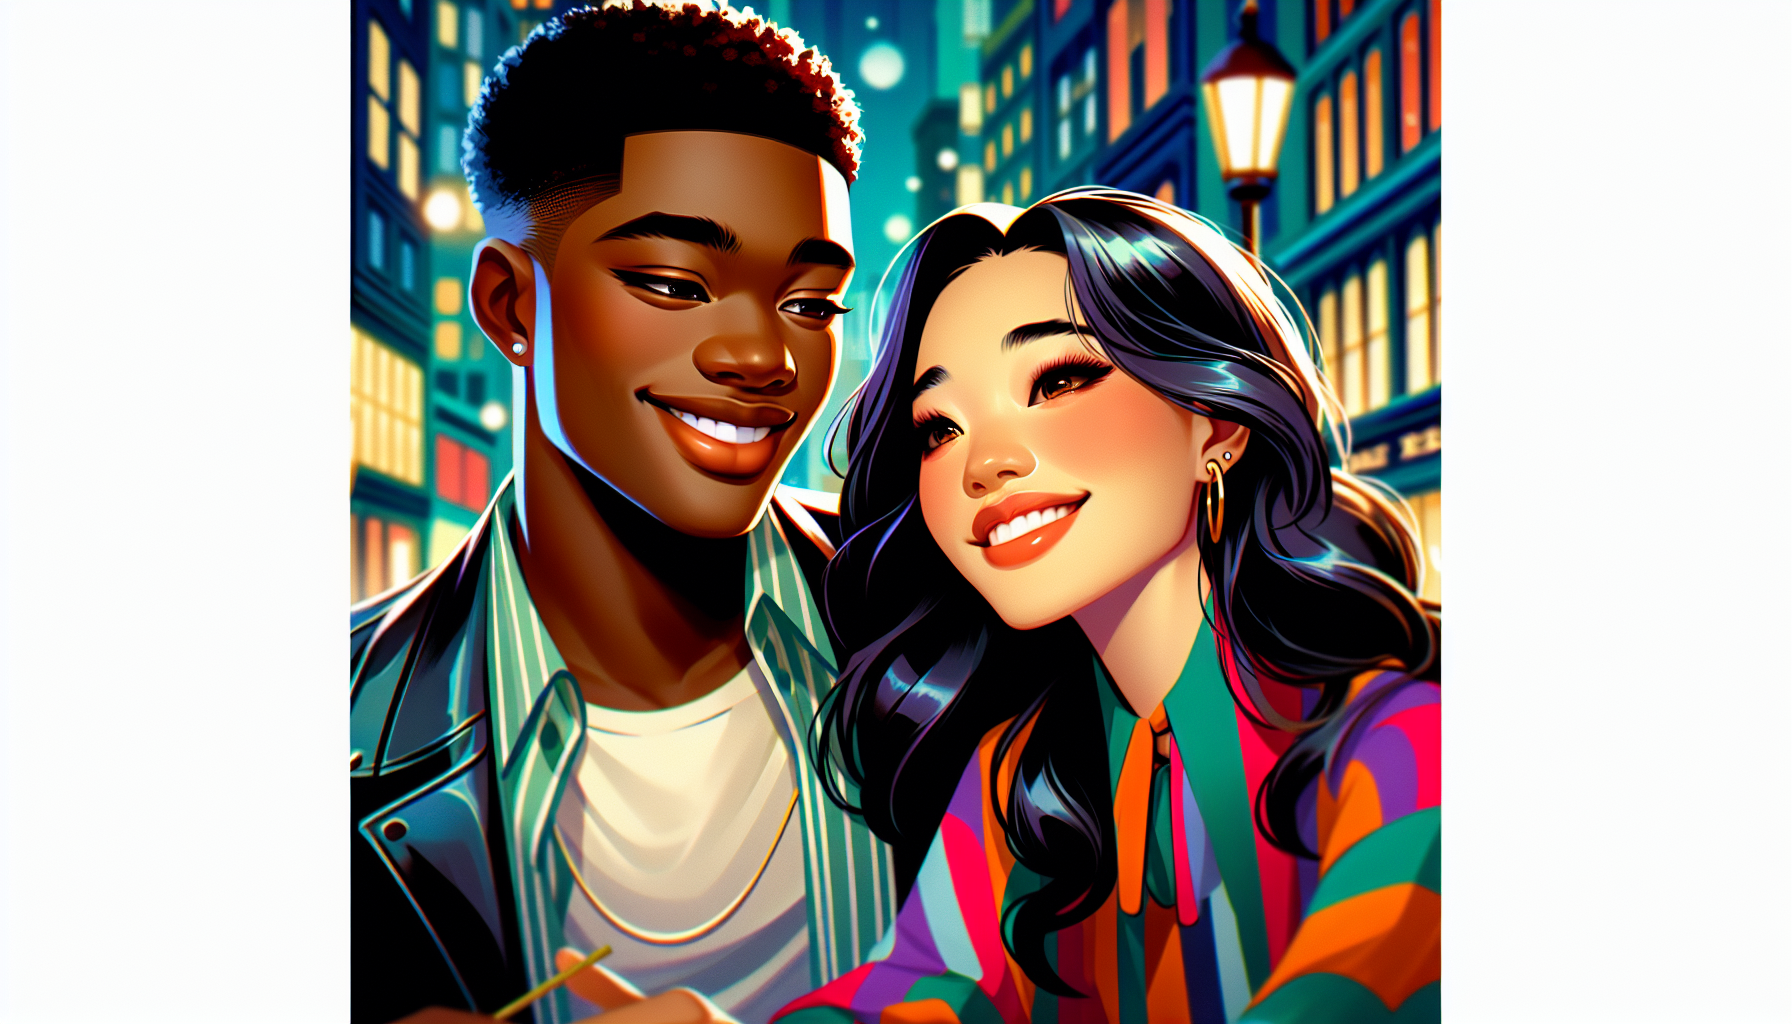 Design a vivid illustration of two dynamic and relatable main characters engrossed in an unforgettable romantic encounter. One character is a black male, with a charming smile and sparkling eyes that convey a sense of understanding and compassion. He's wearing a stylish, modern outfit. The other character is an Asian female, with expressive eyes and a radiant smile that spells warmth. Her modern, colorful attire complements her vibrant personality. Their chemistry is palpable as they share an intimate moment in a lively urban setting, adding to the story's modern theme. Their emotions and expressions should convey a sense of authentic, profound love. Remember, this scene should not include any text.